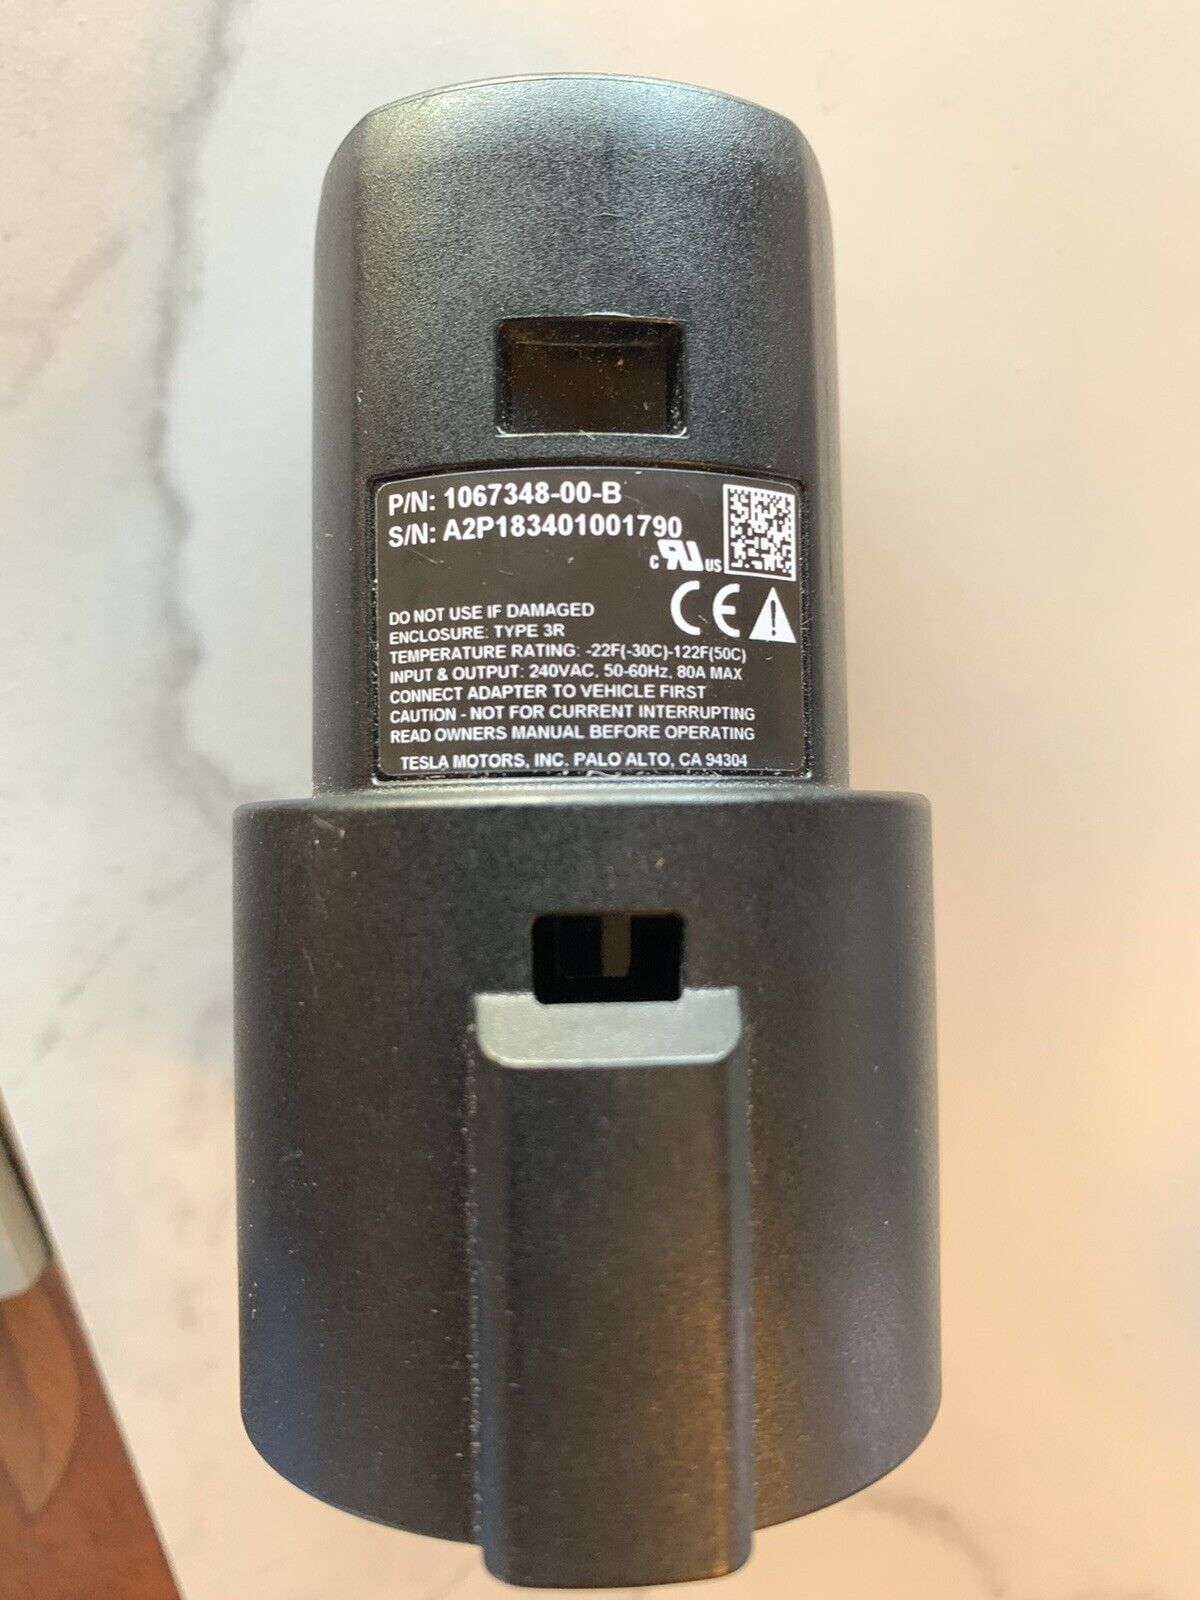 Tesla SAE J1772 Adapter, Fits Model S/X/3/Y Charger UMC Adapter